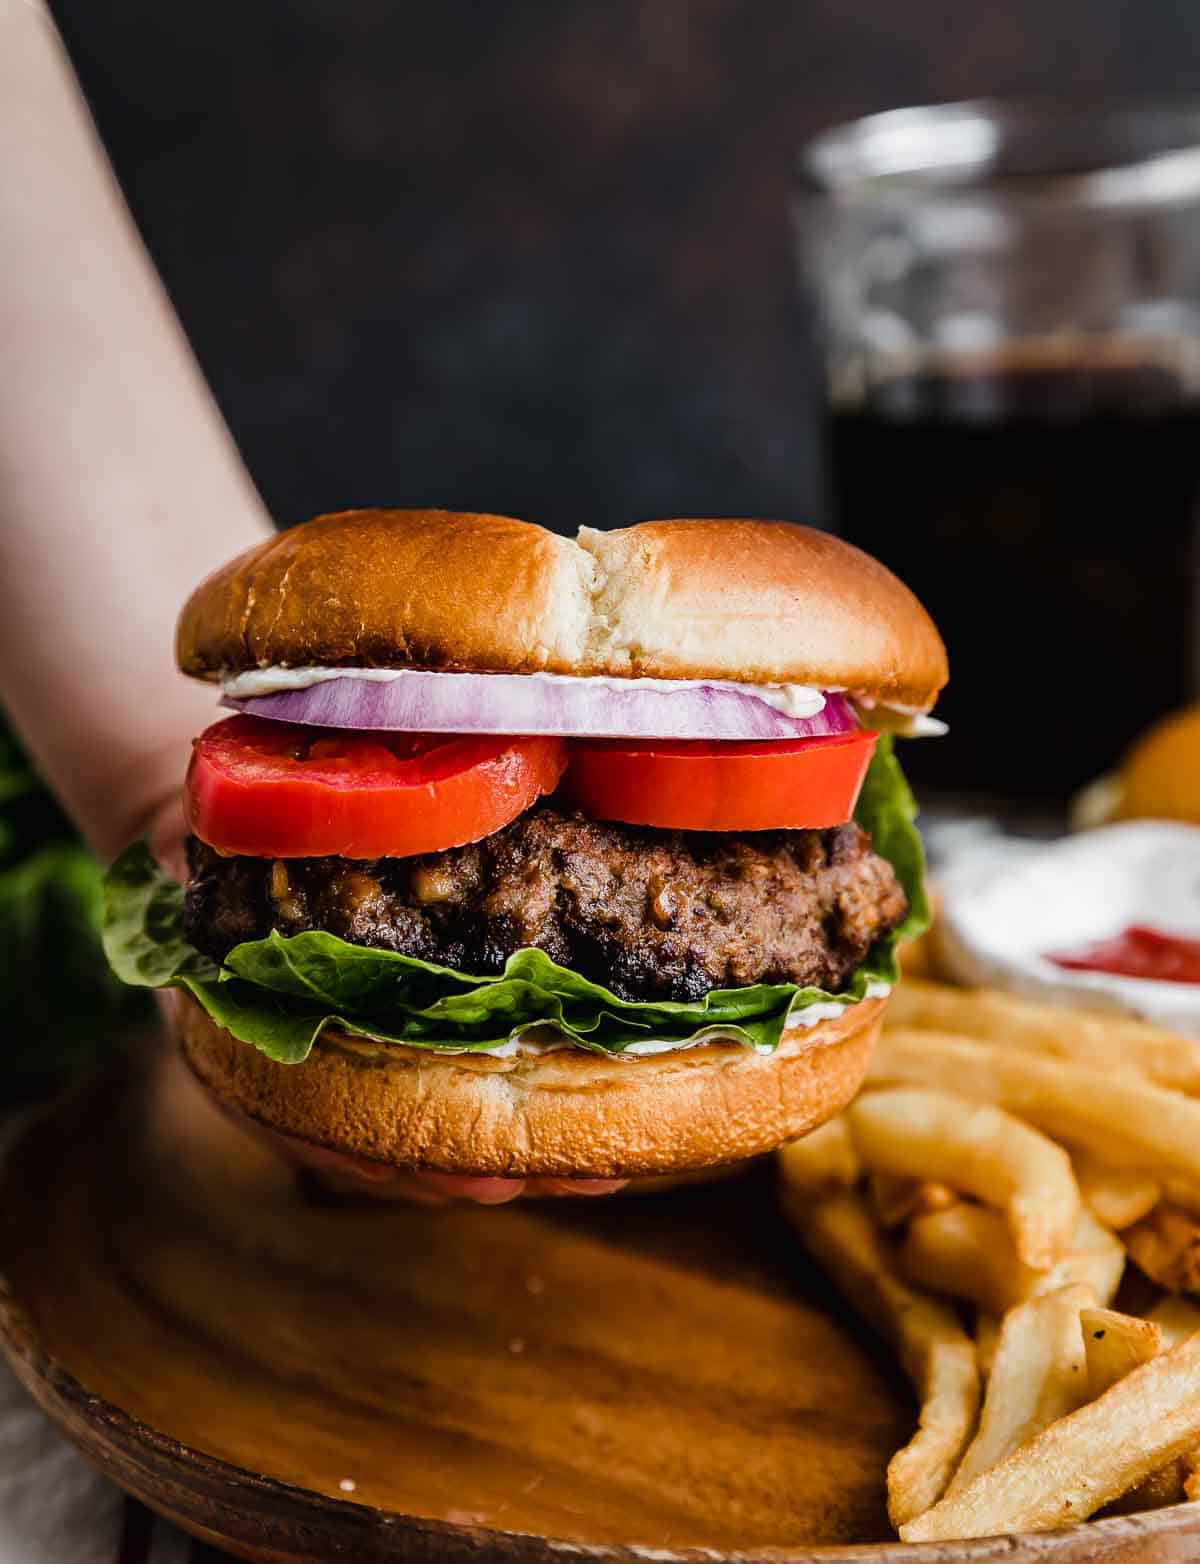 A hand holding up a Steakhouse Burger on a bun with lettuce, tomato, and purple onion, against a dark brown background with French fries in the background.